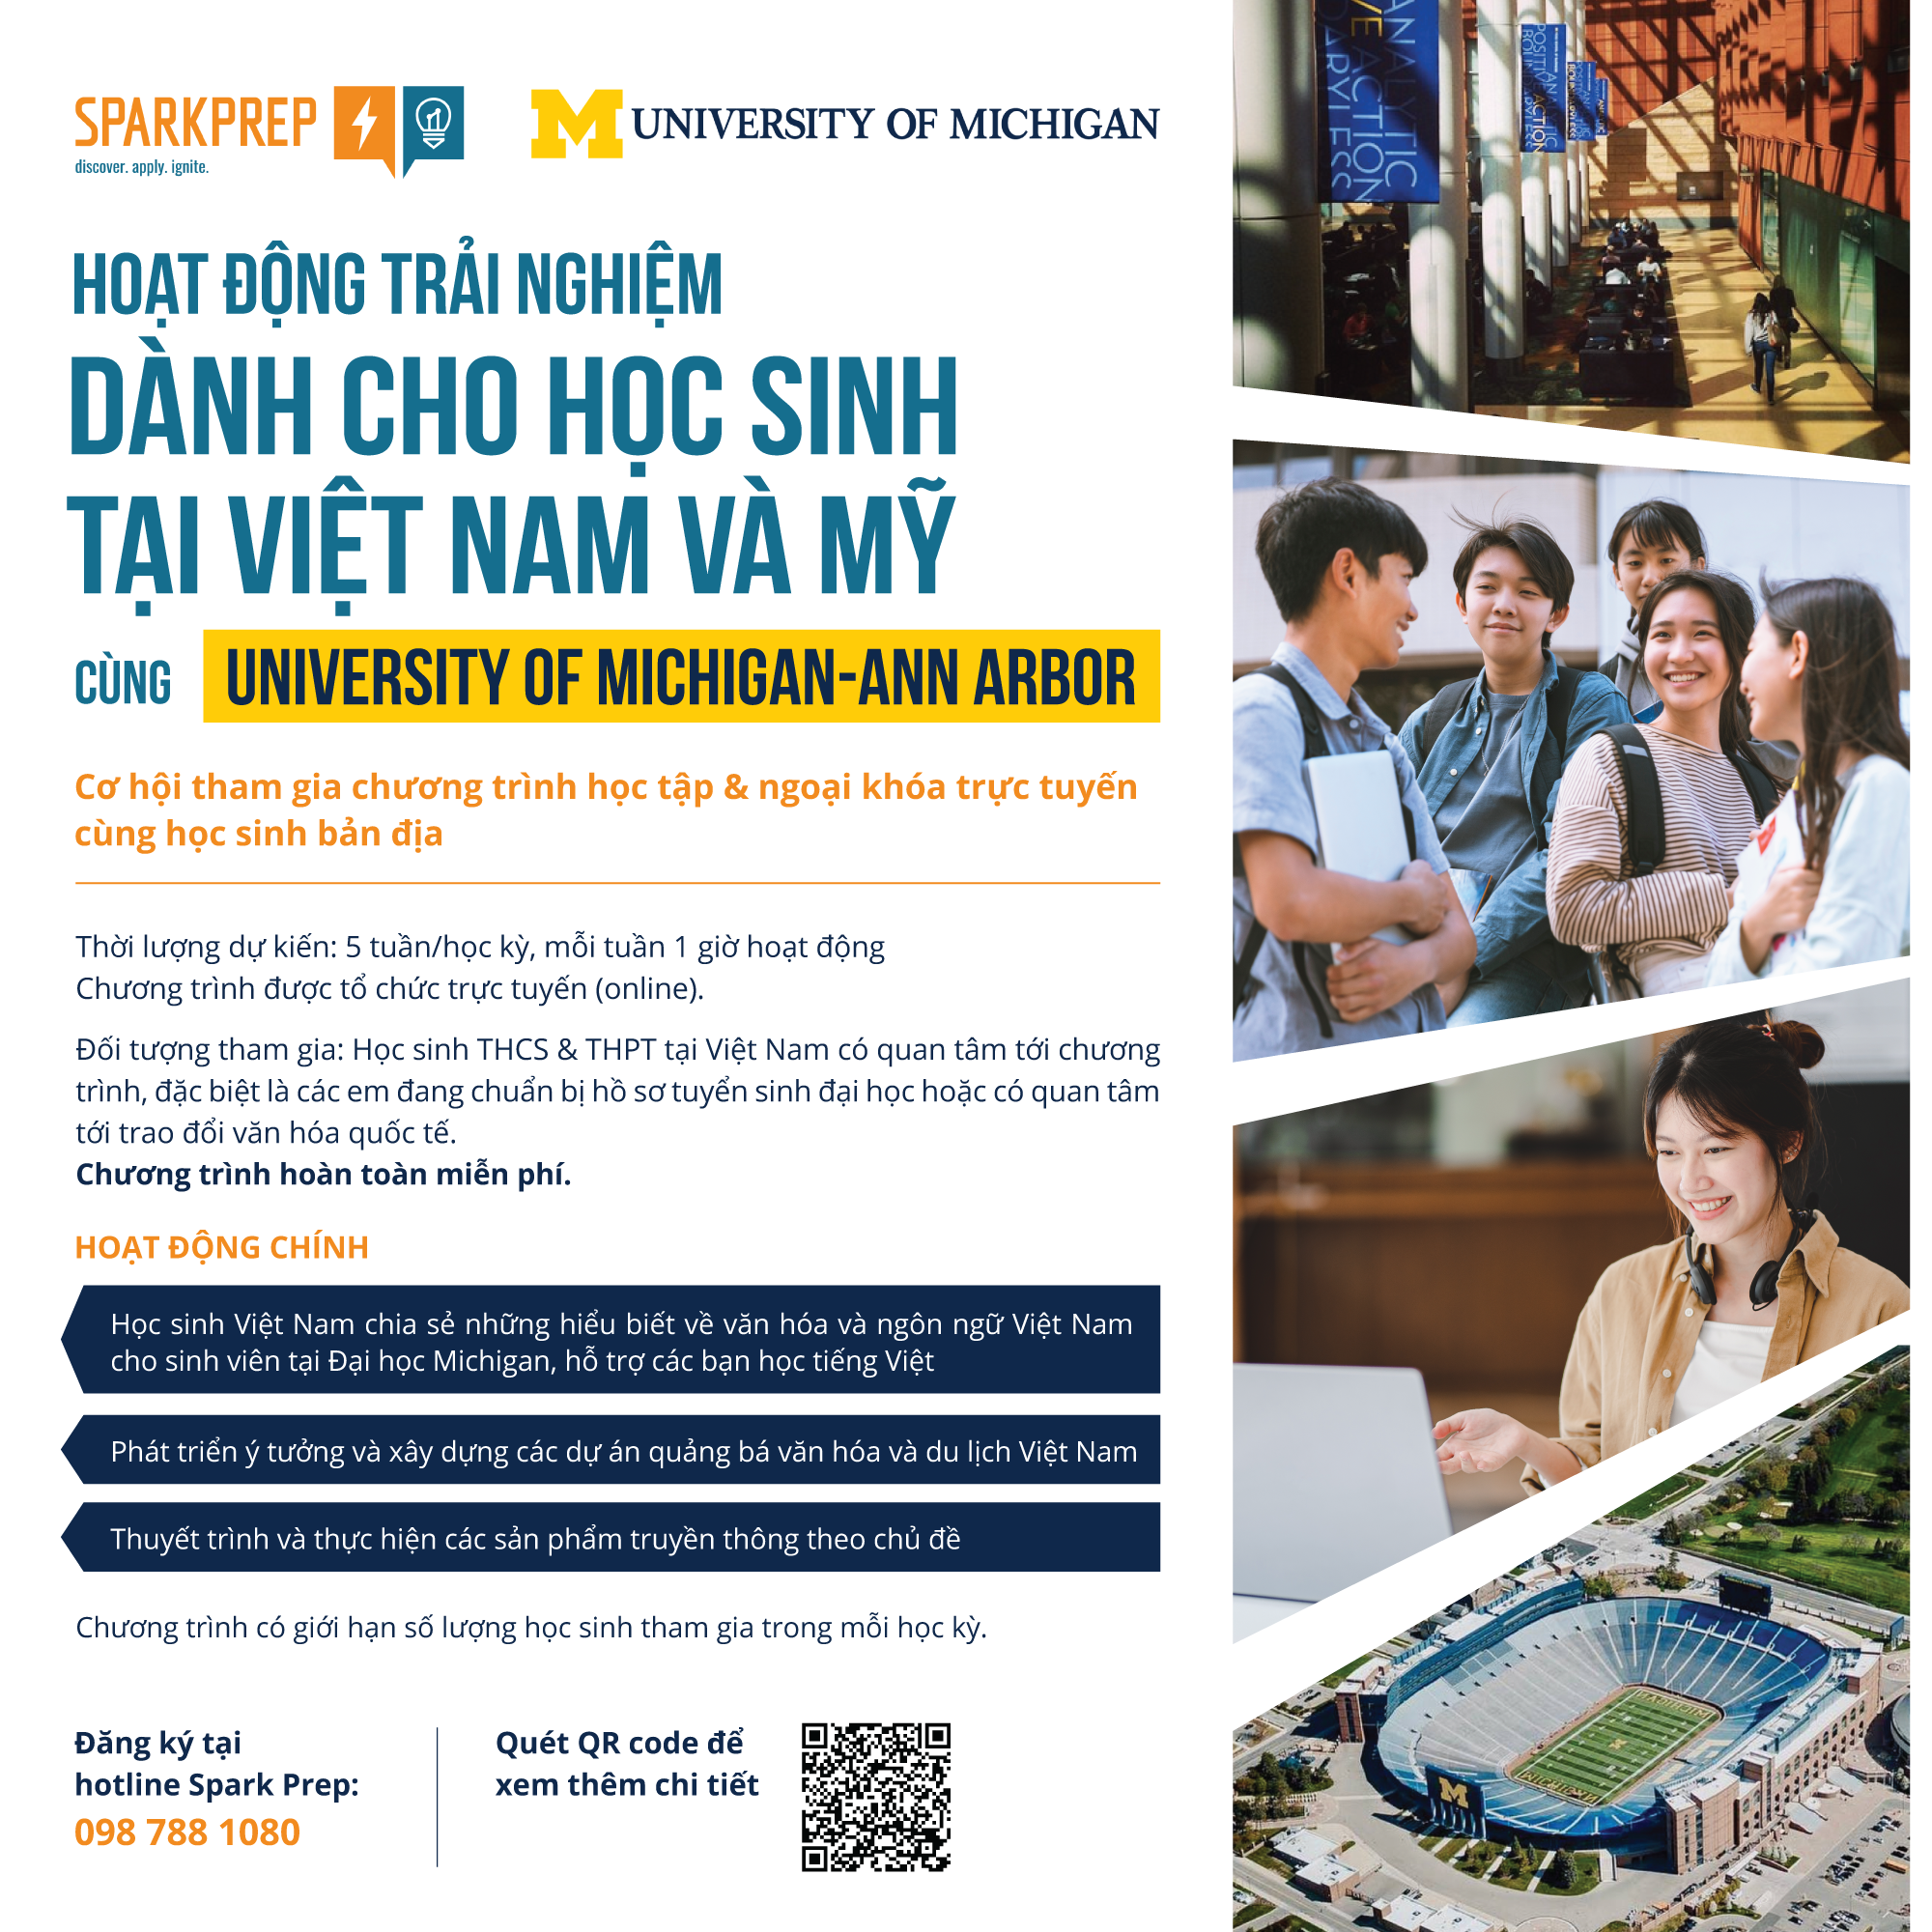 Community connected experiential learning - A new program offered to students in Vietnam and the U.S